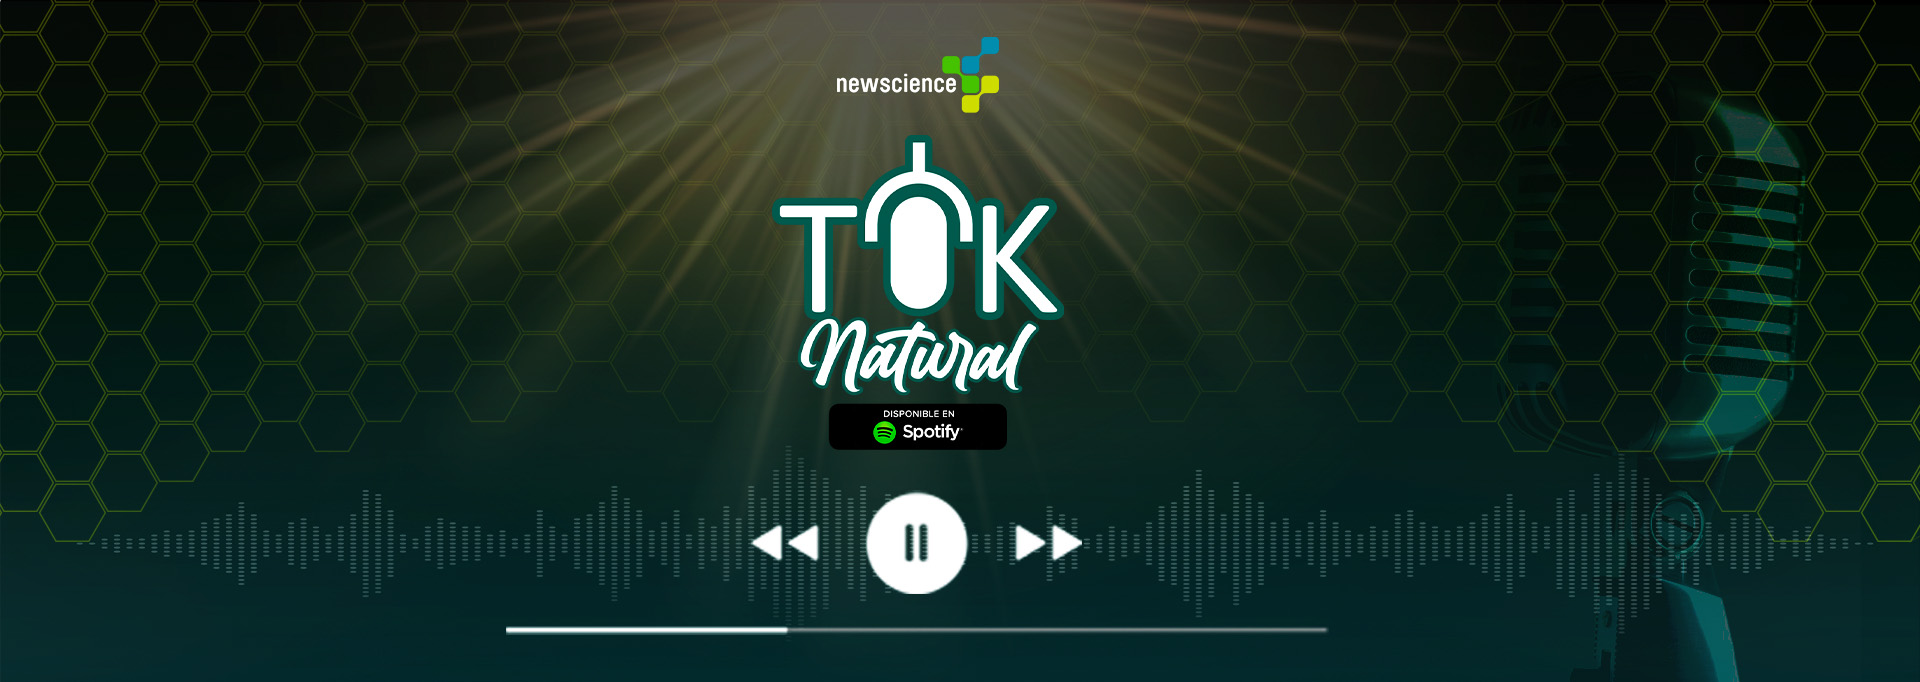 Tok Natural podcast